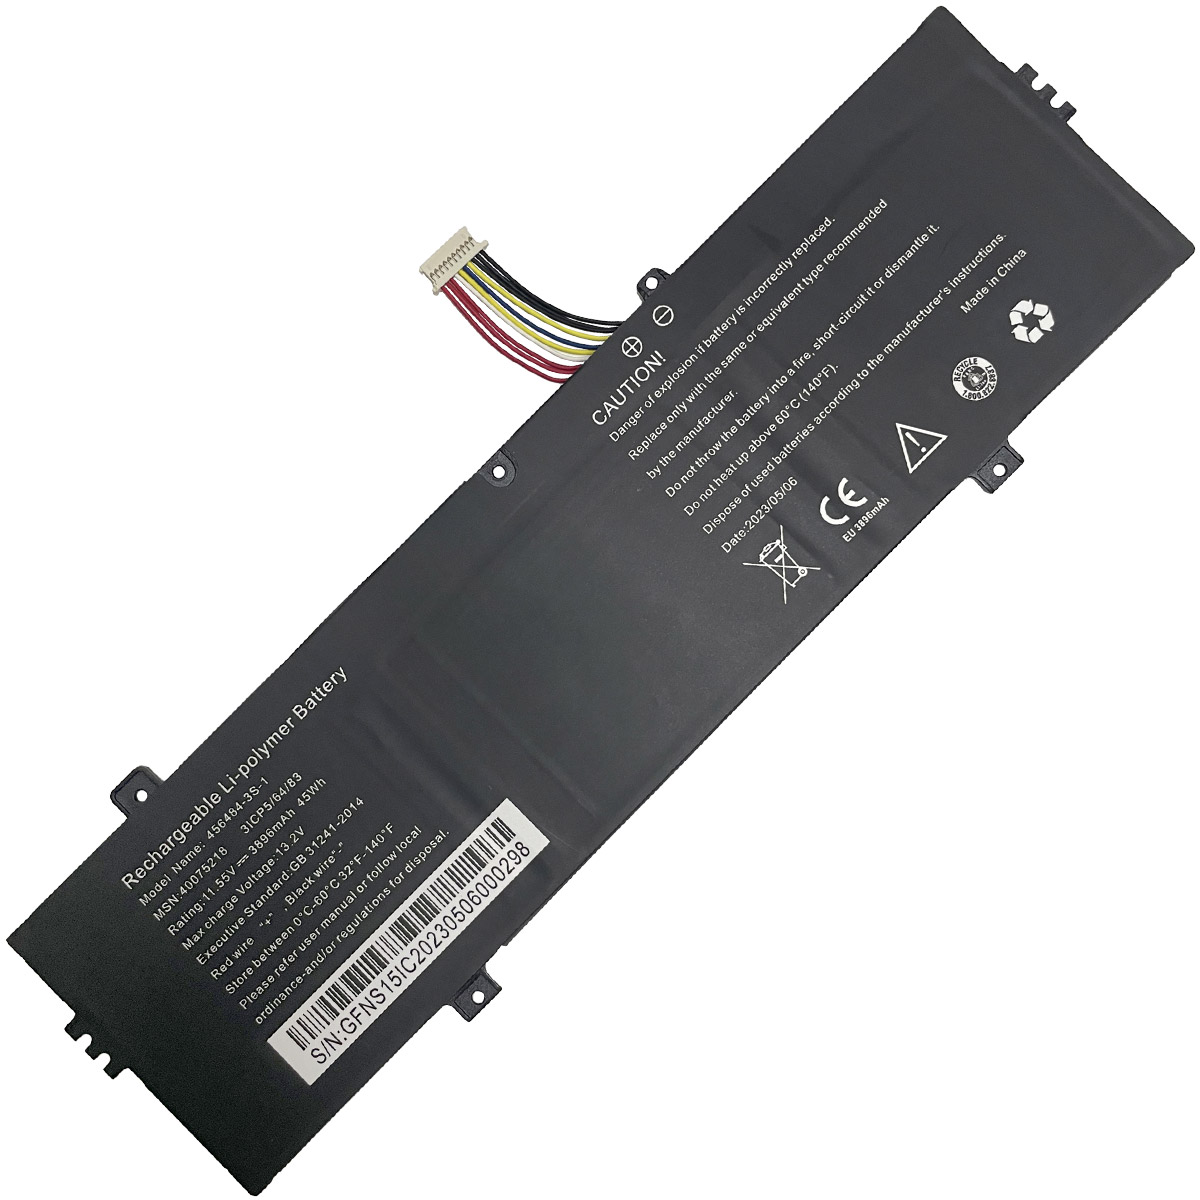 MEDION-456484-3S-1(10Lines)-Laptop Replacement Battery